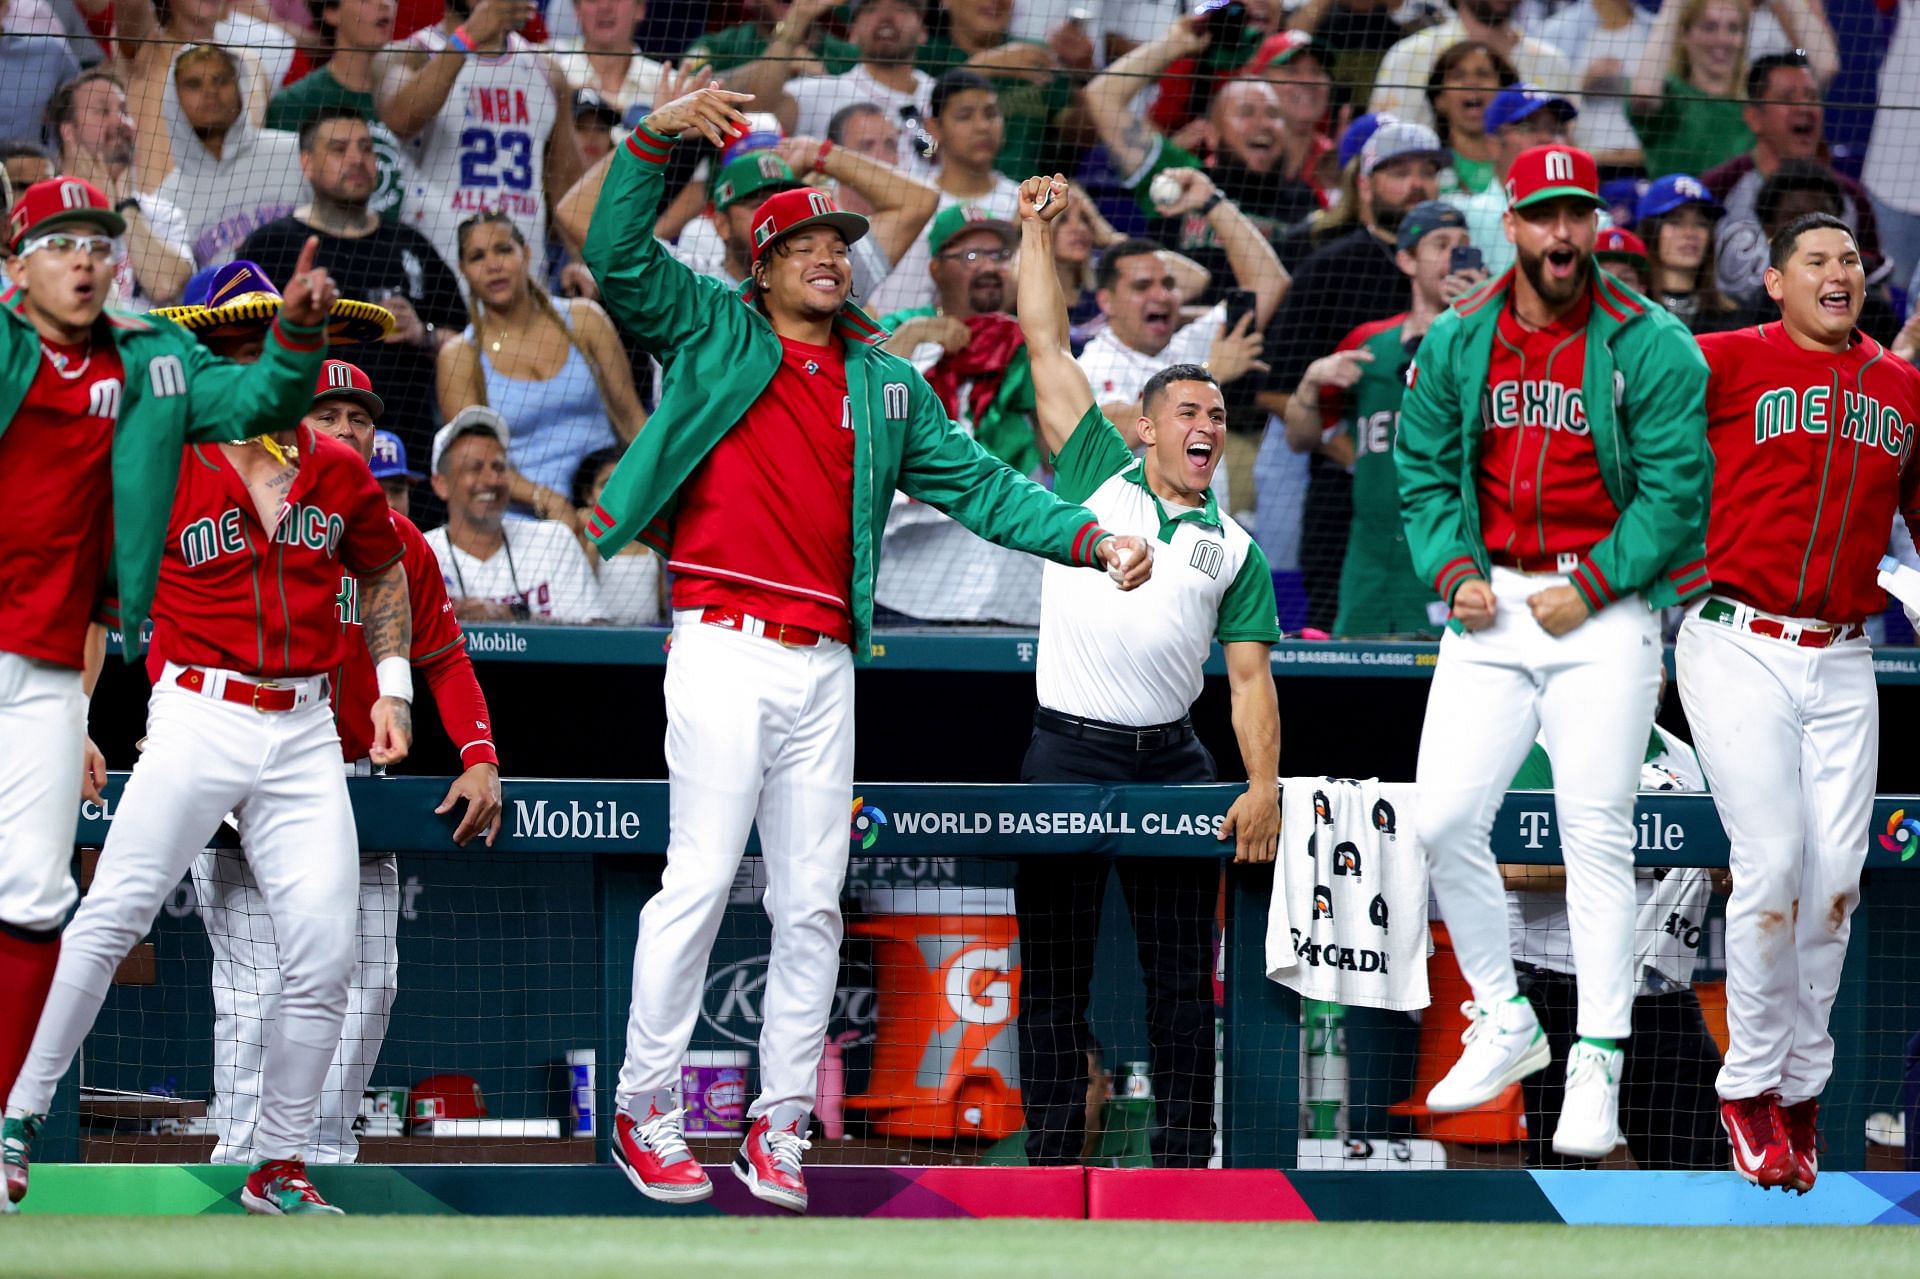 World Baseball Classic 2017: Mexico has something to prove this time around